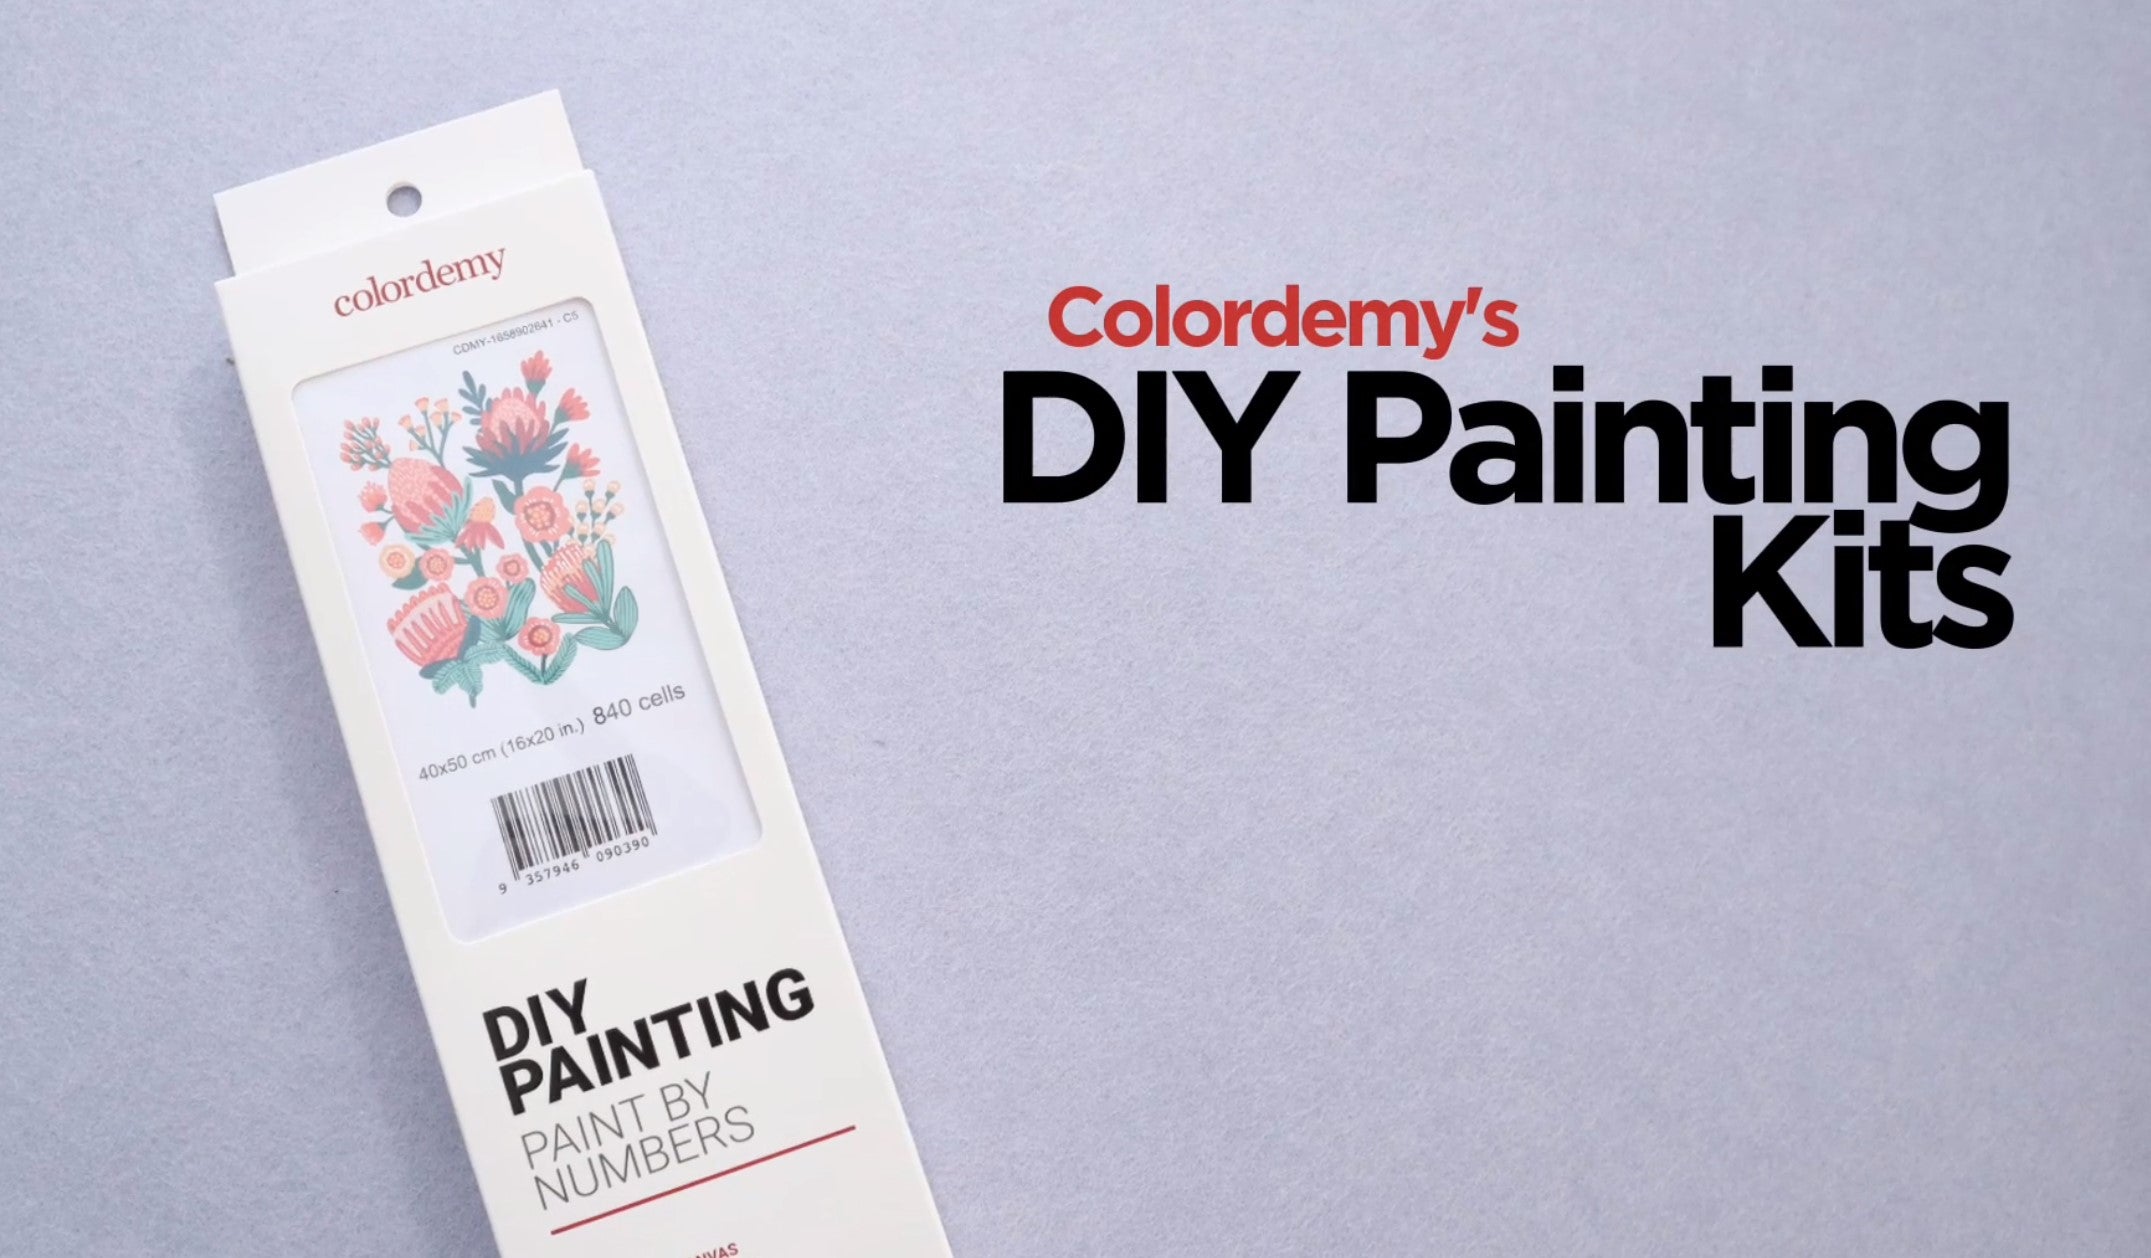 Load video: Colordemy&#39;s DIY Painting kits introduction